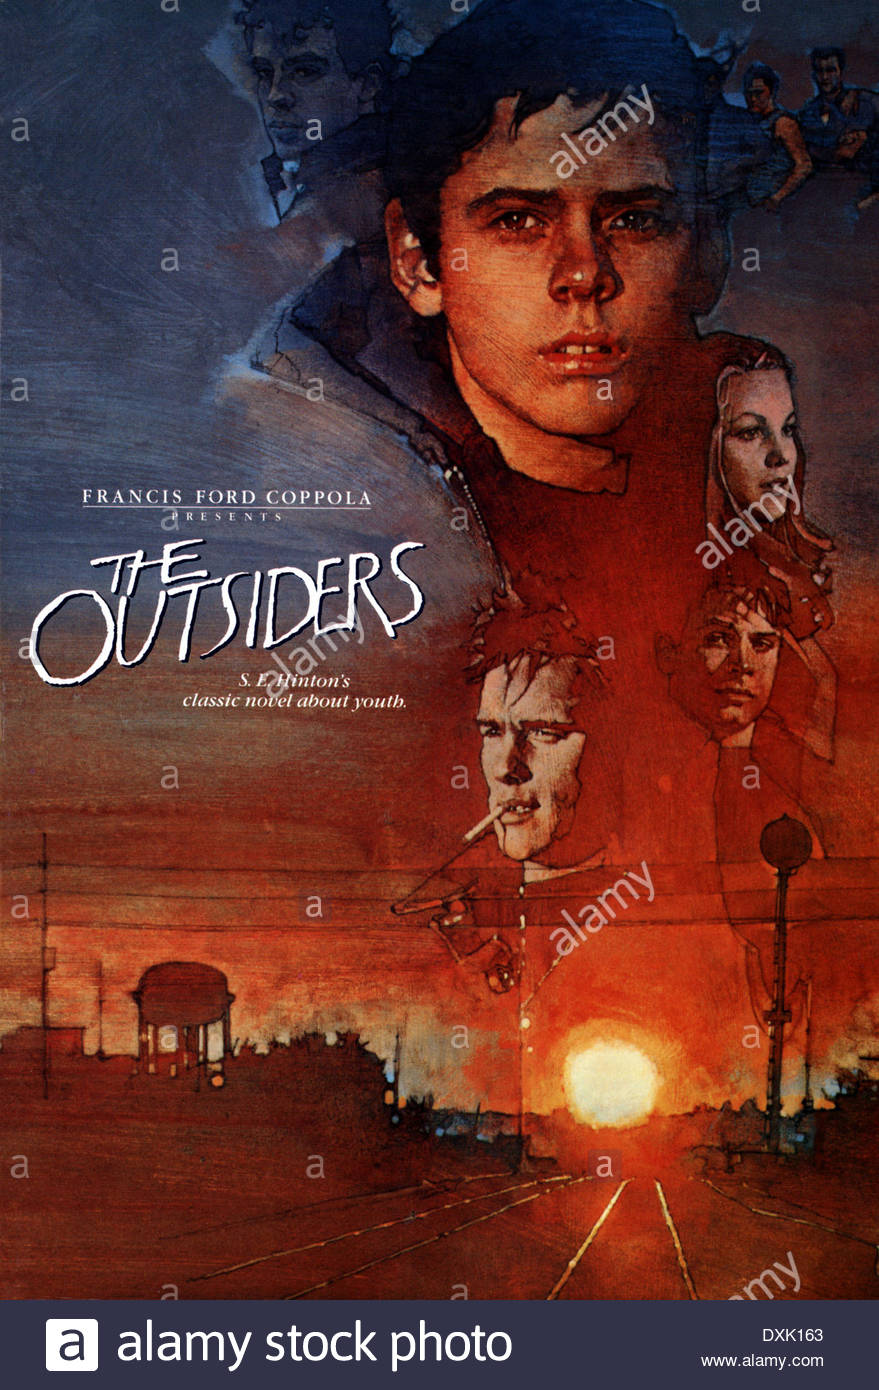 book-review-remembering-the-outsiders-the-armijo-signal